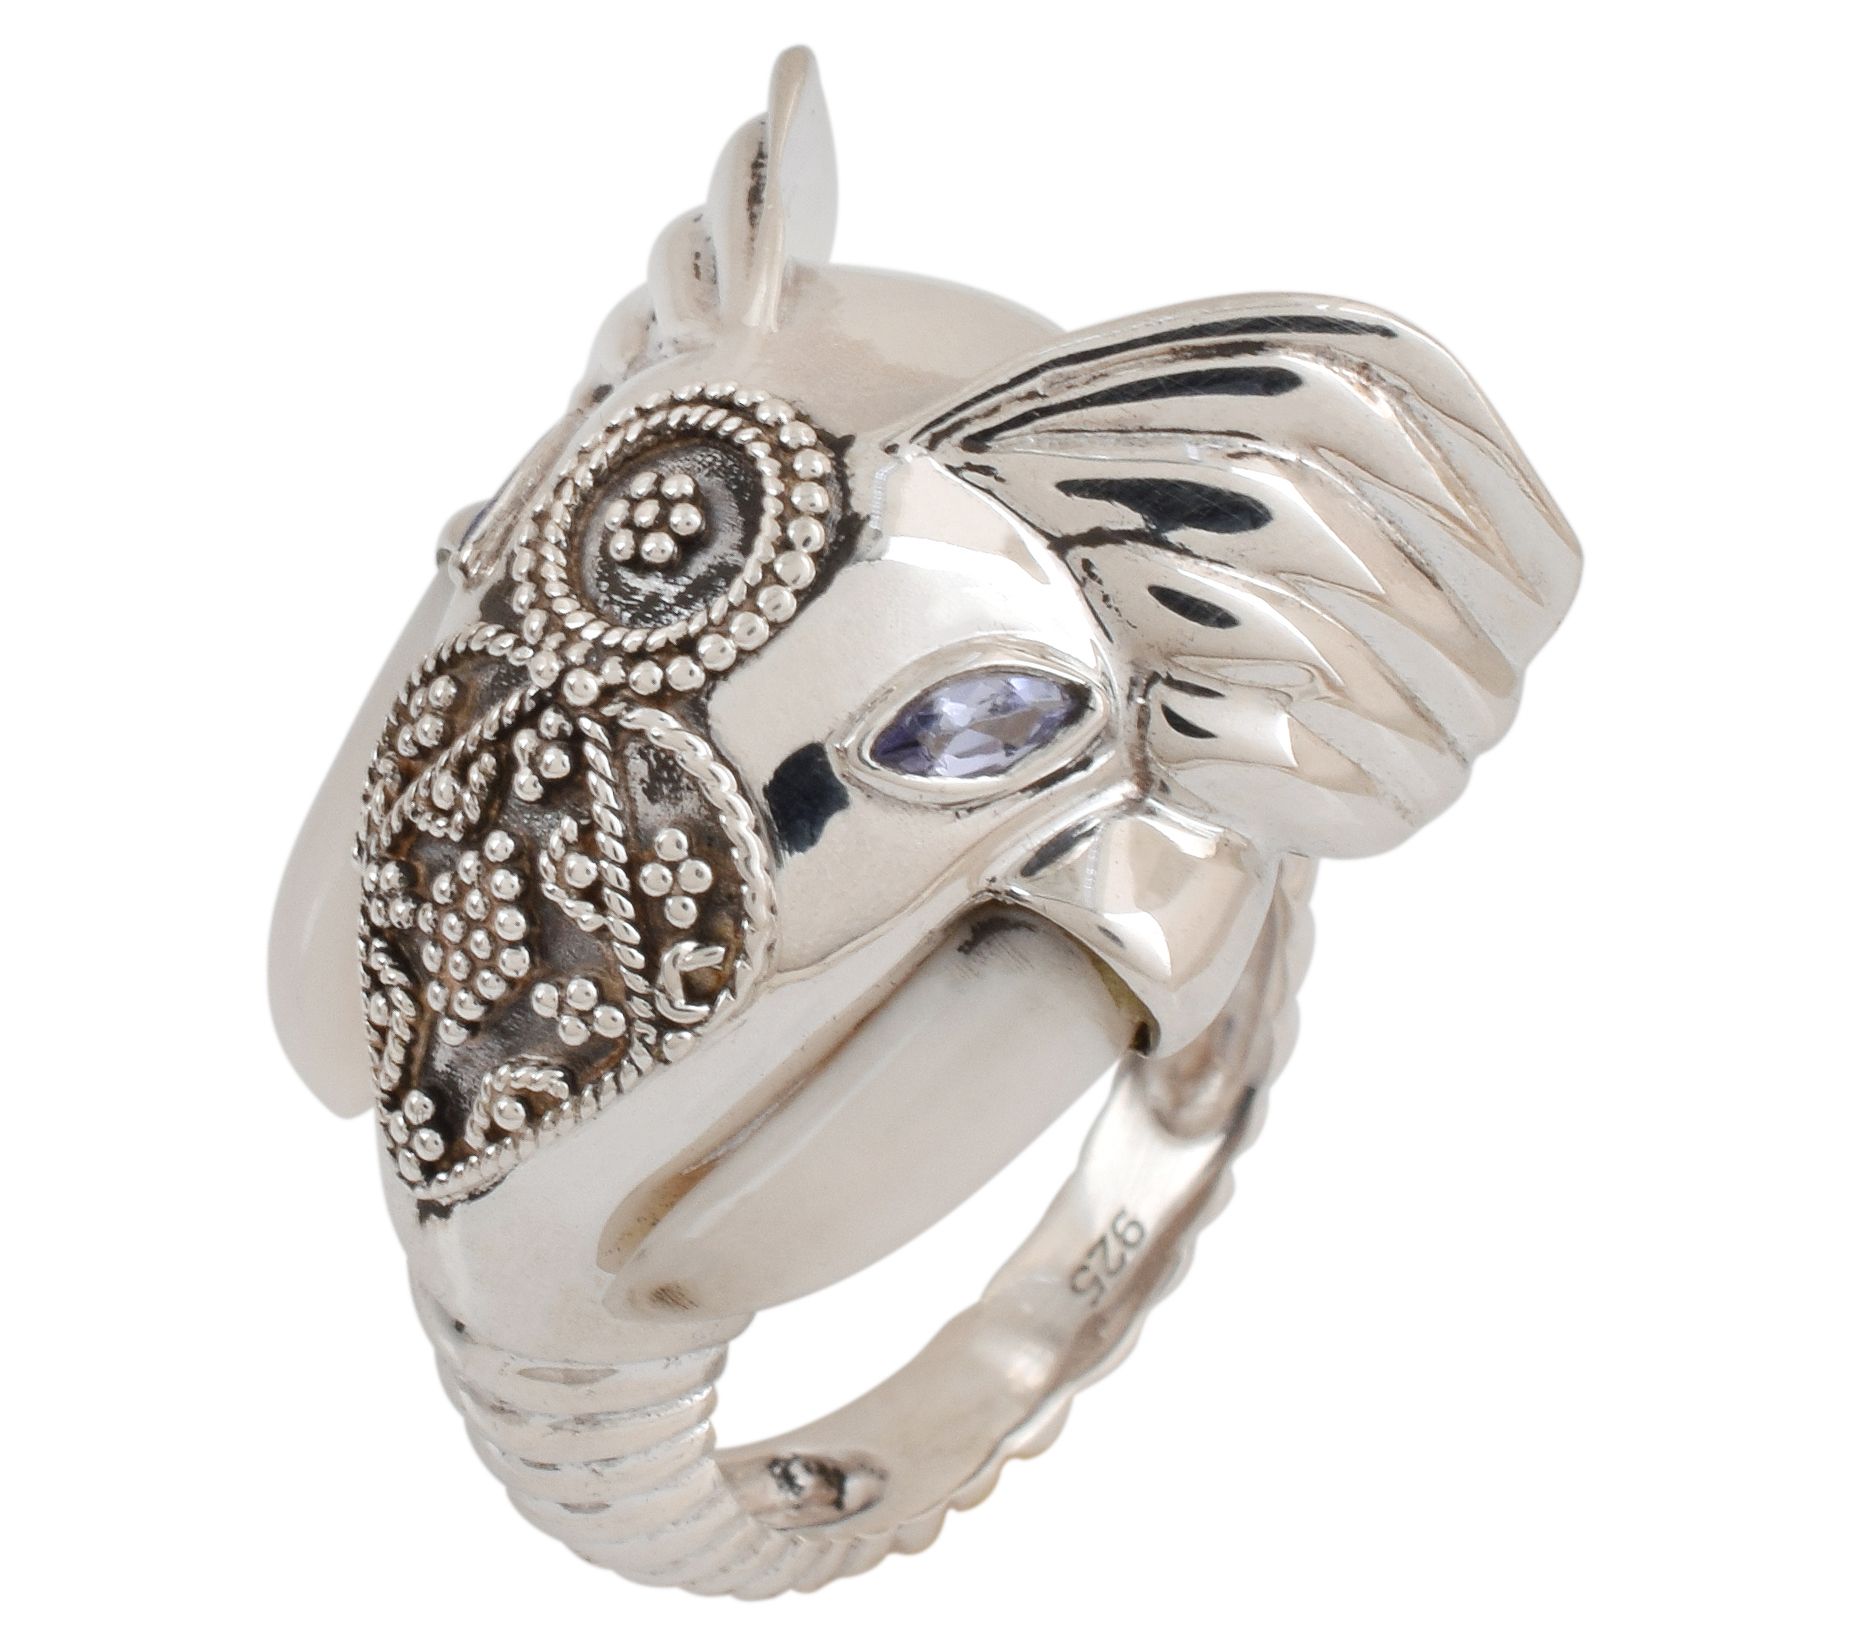 Artisan Crafted Sterling Silver Multi-GemstoneElephant Ring - QVC.com